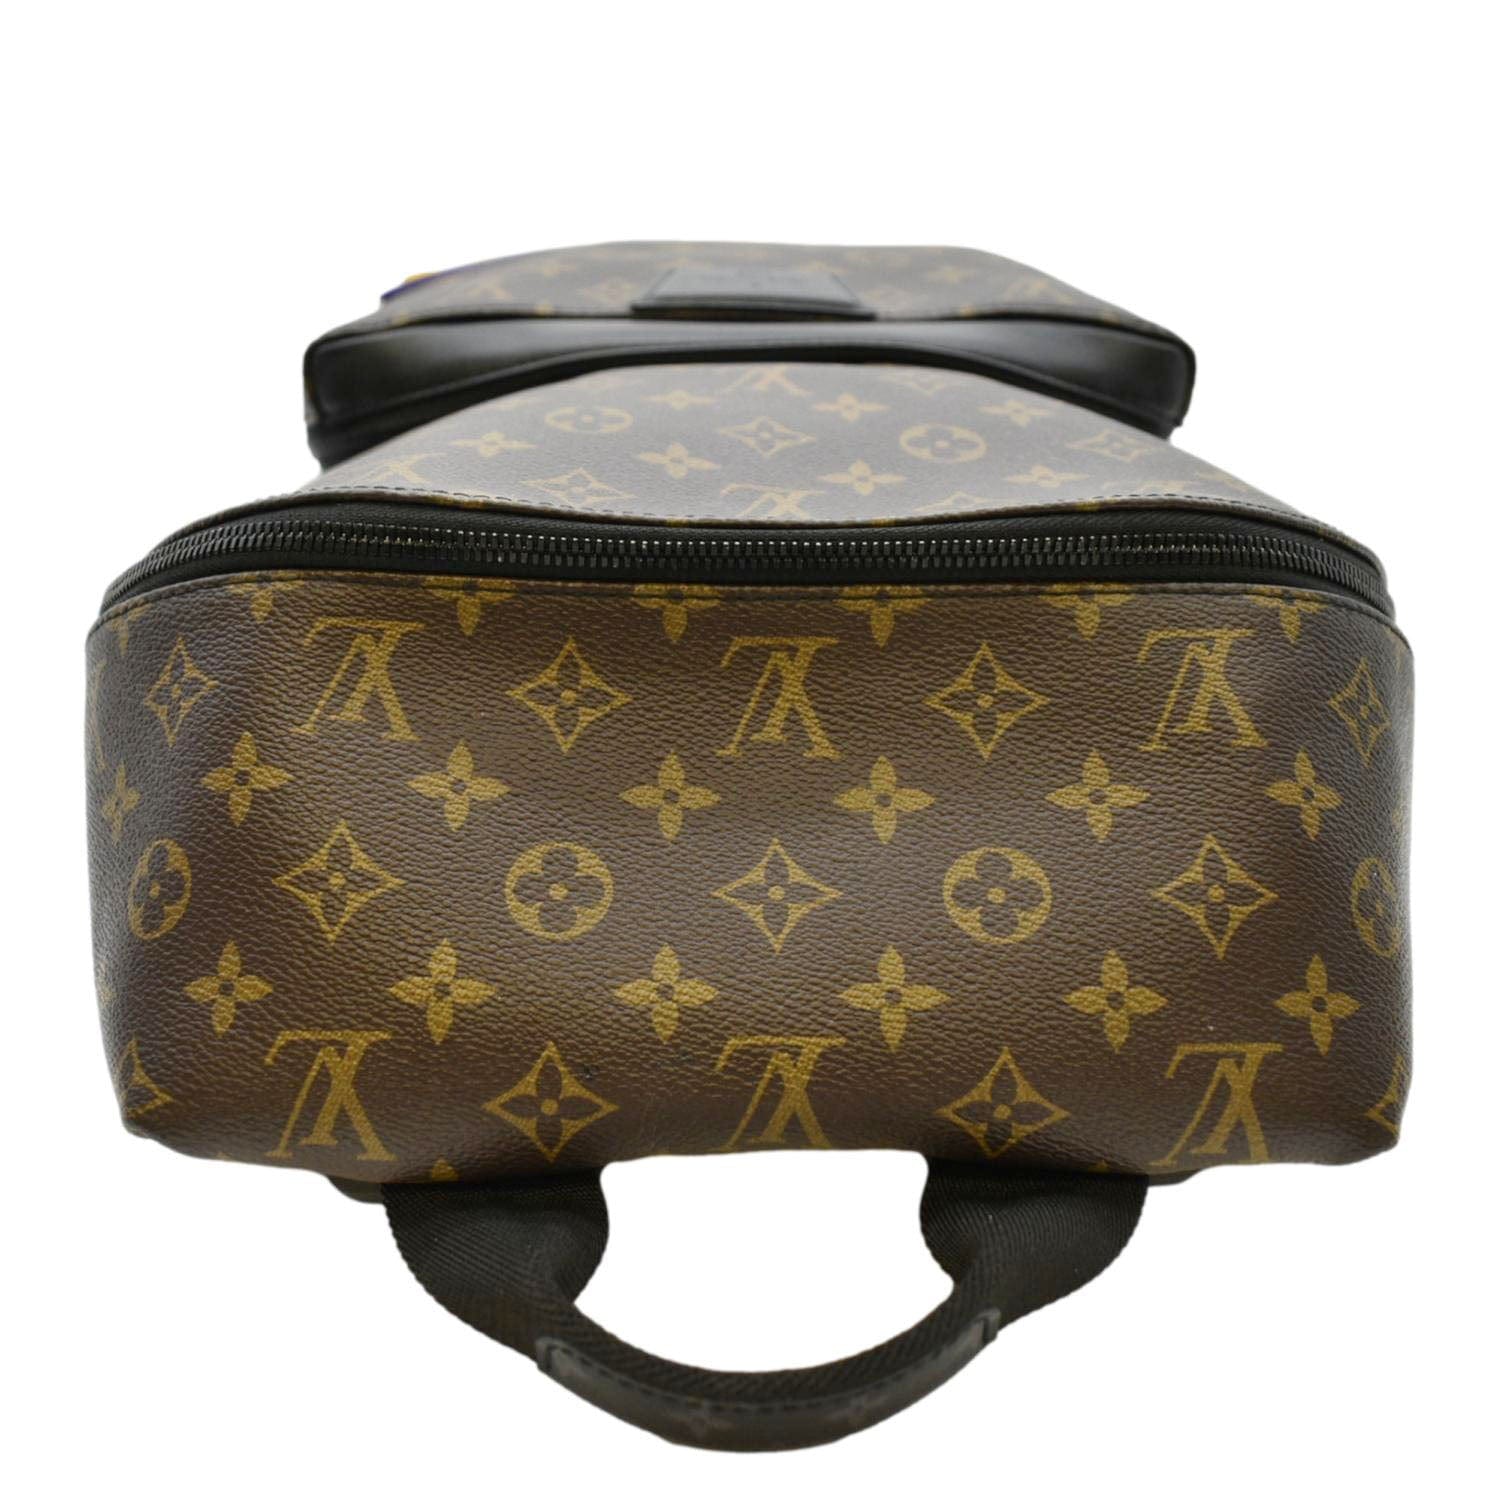 LV triple backpack  Louis vuitton, Branded bags, Leather